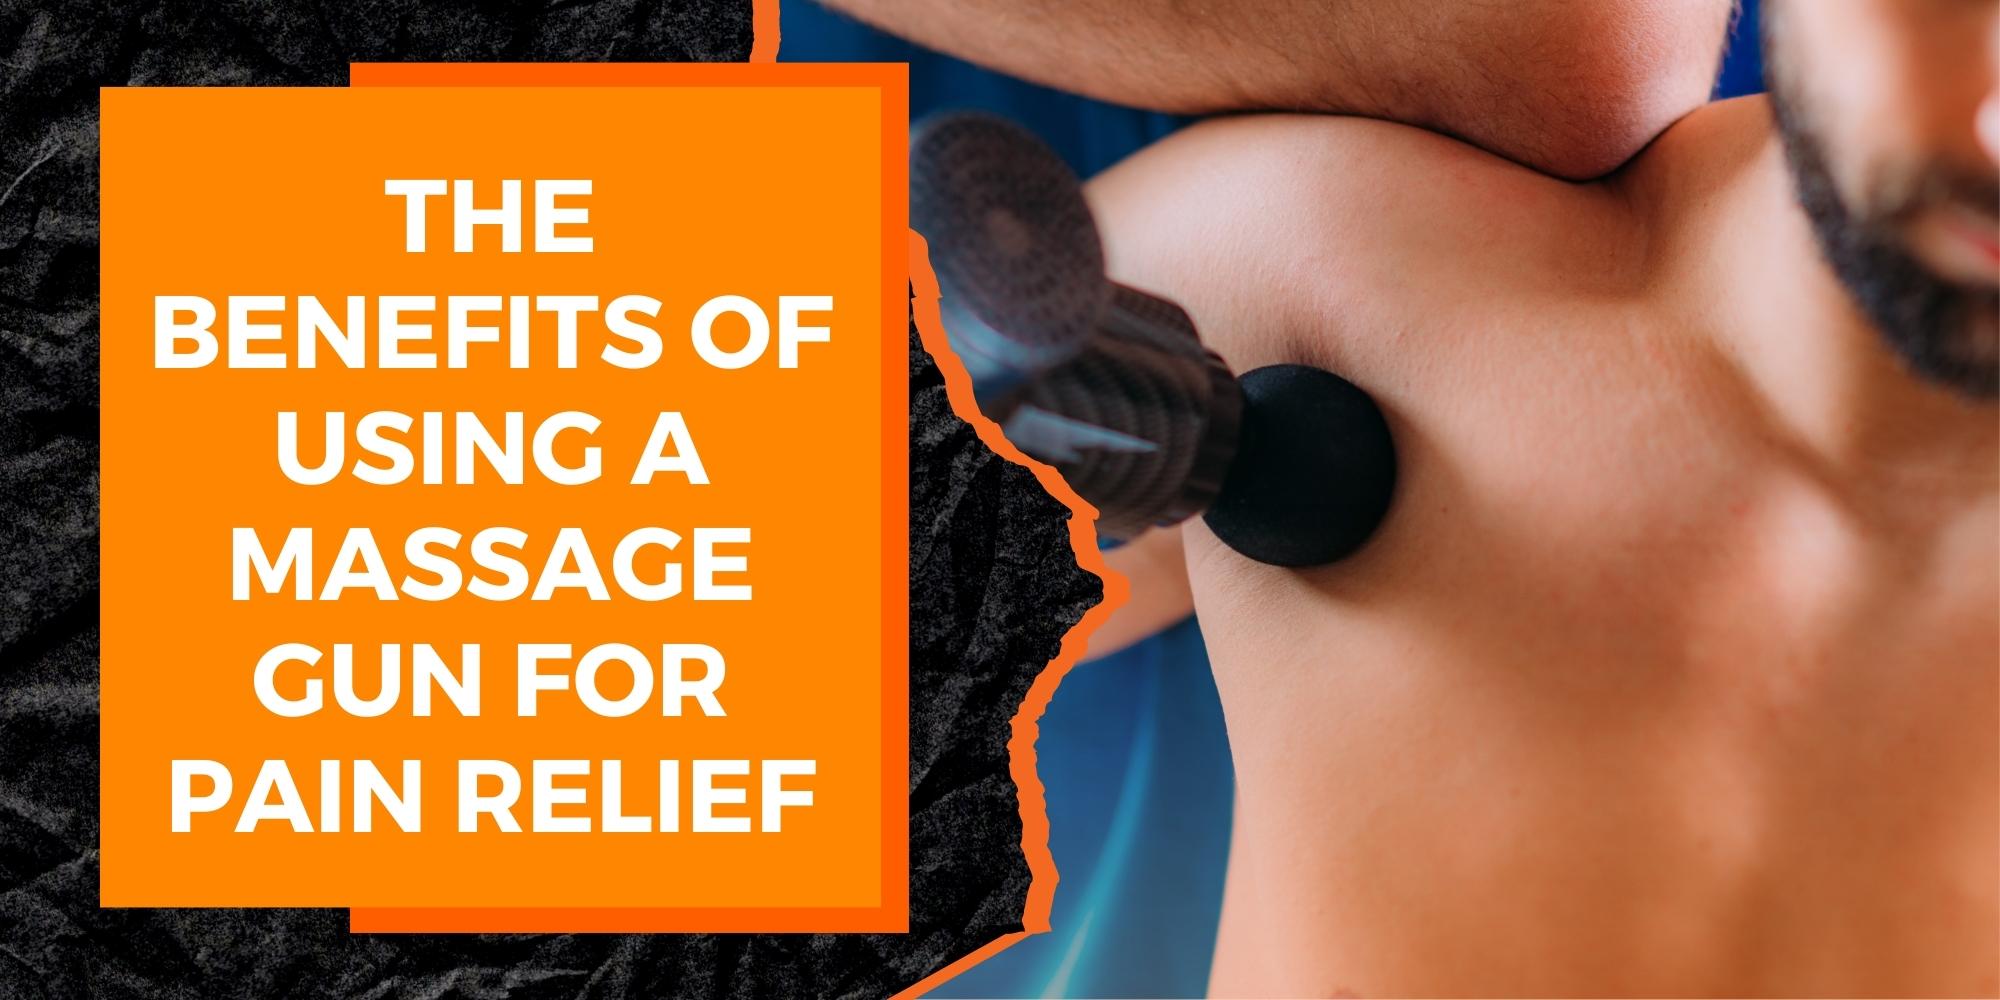 The Benefits of Using a Massage Gun for Pain Relief